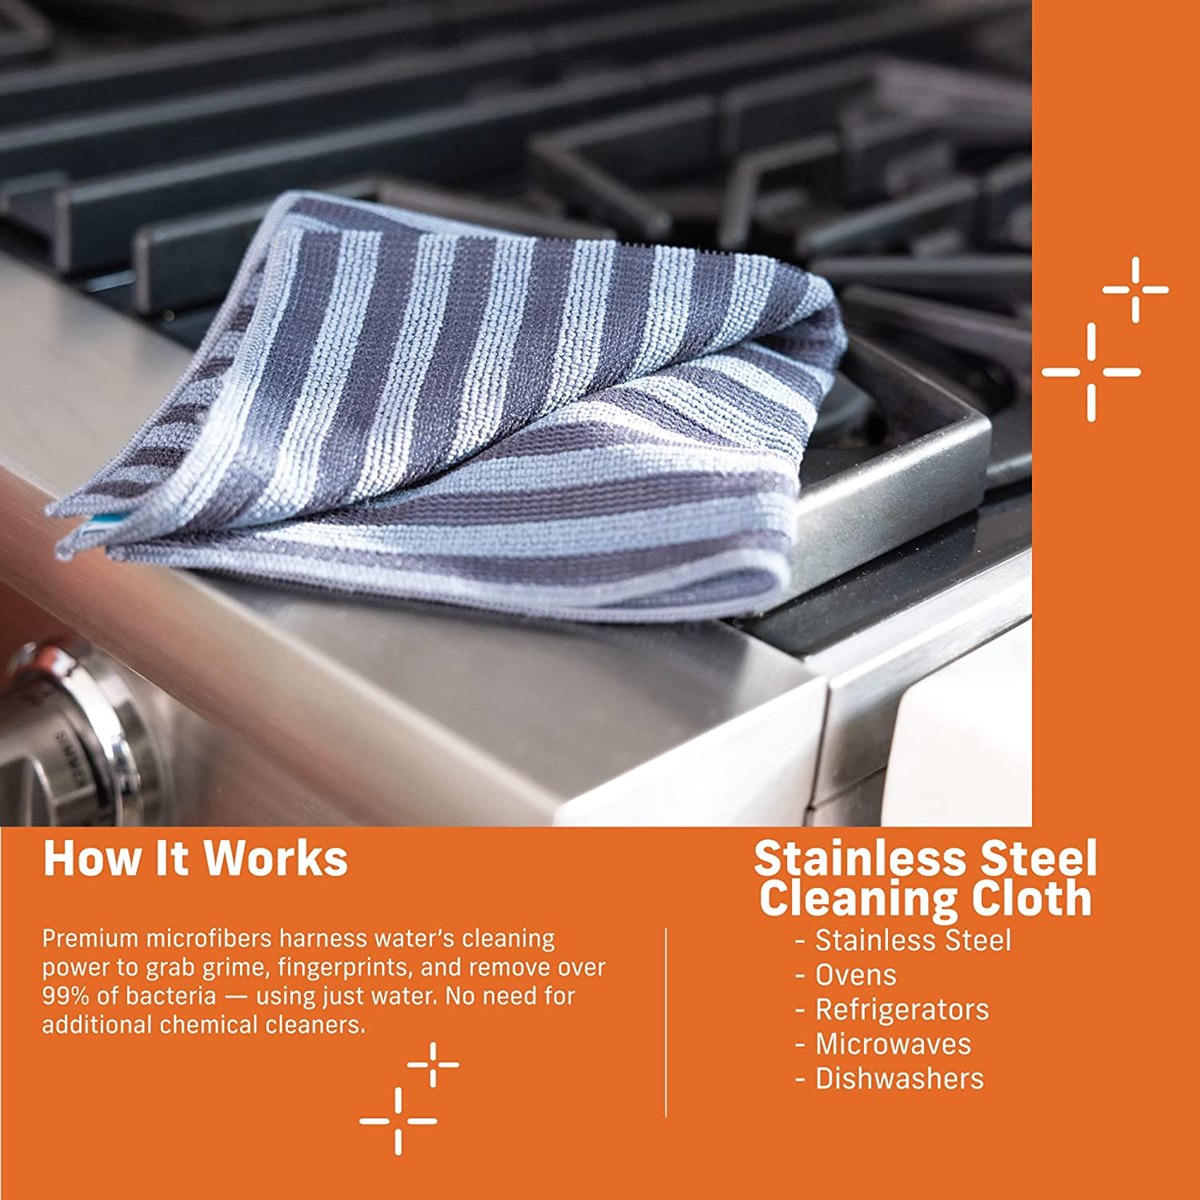 Stainless Cleaning Cloth